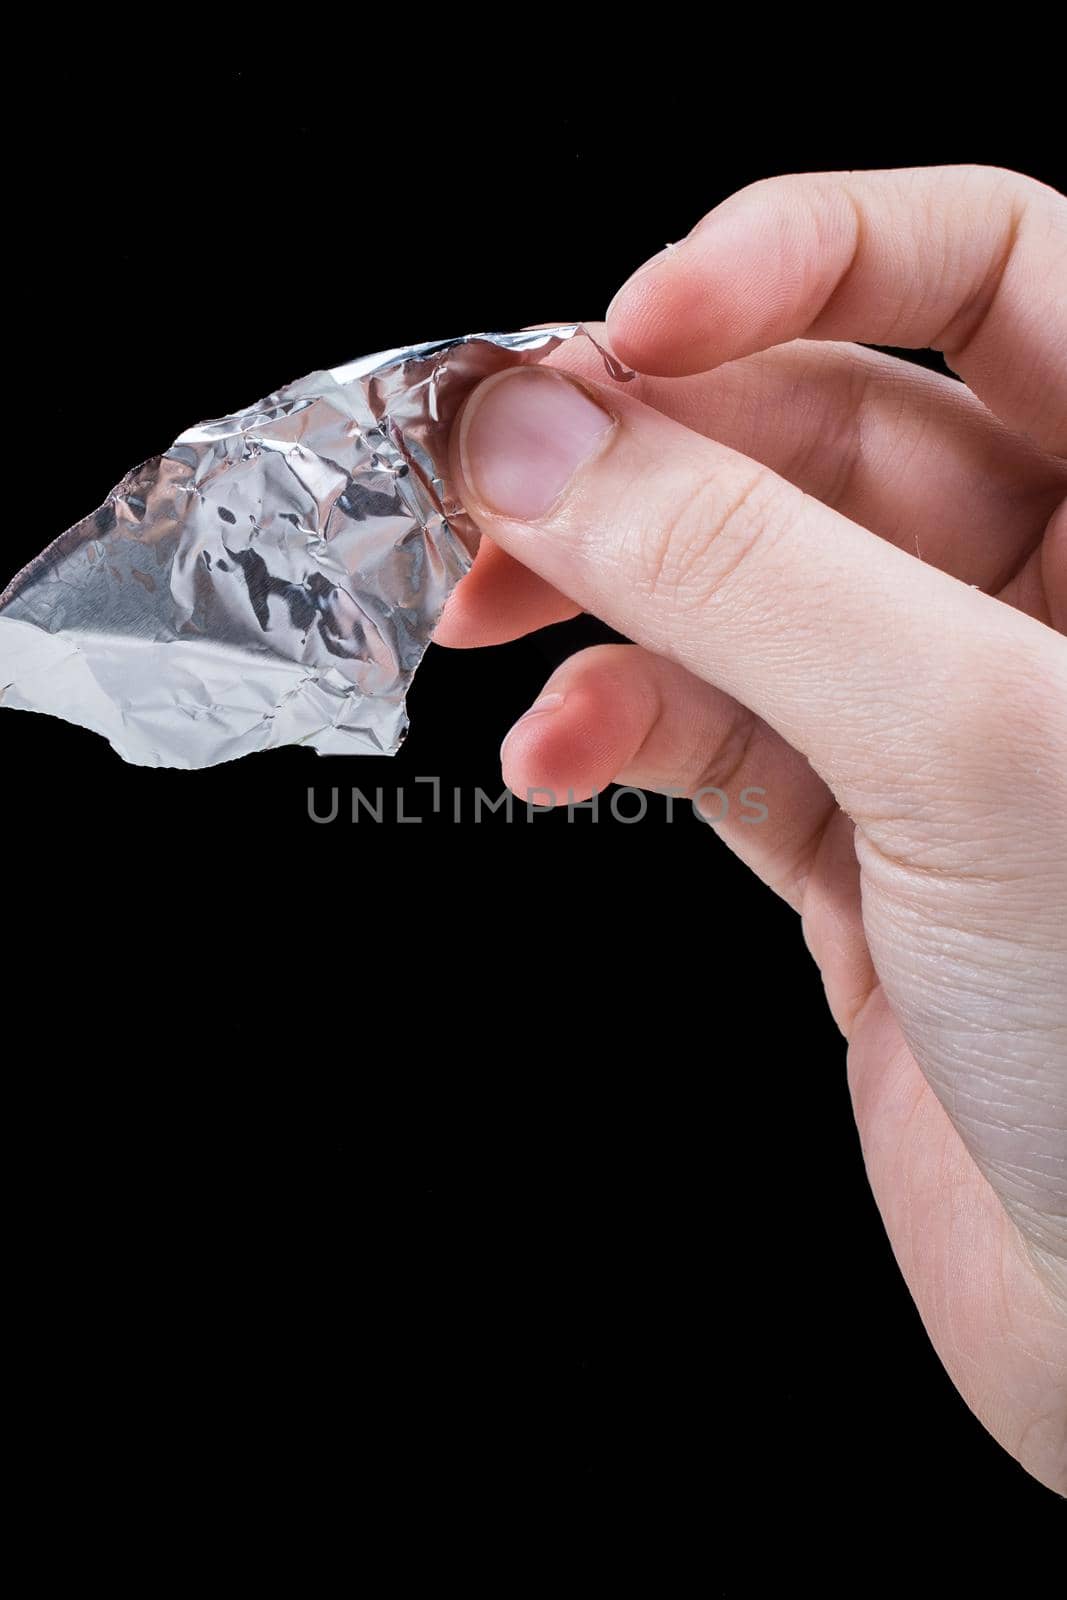 Hand tearing a heart shaped aluminium foil on a wooden background